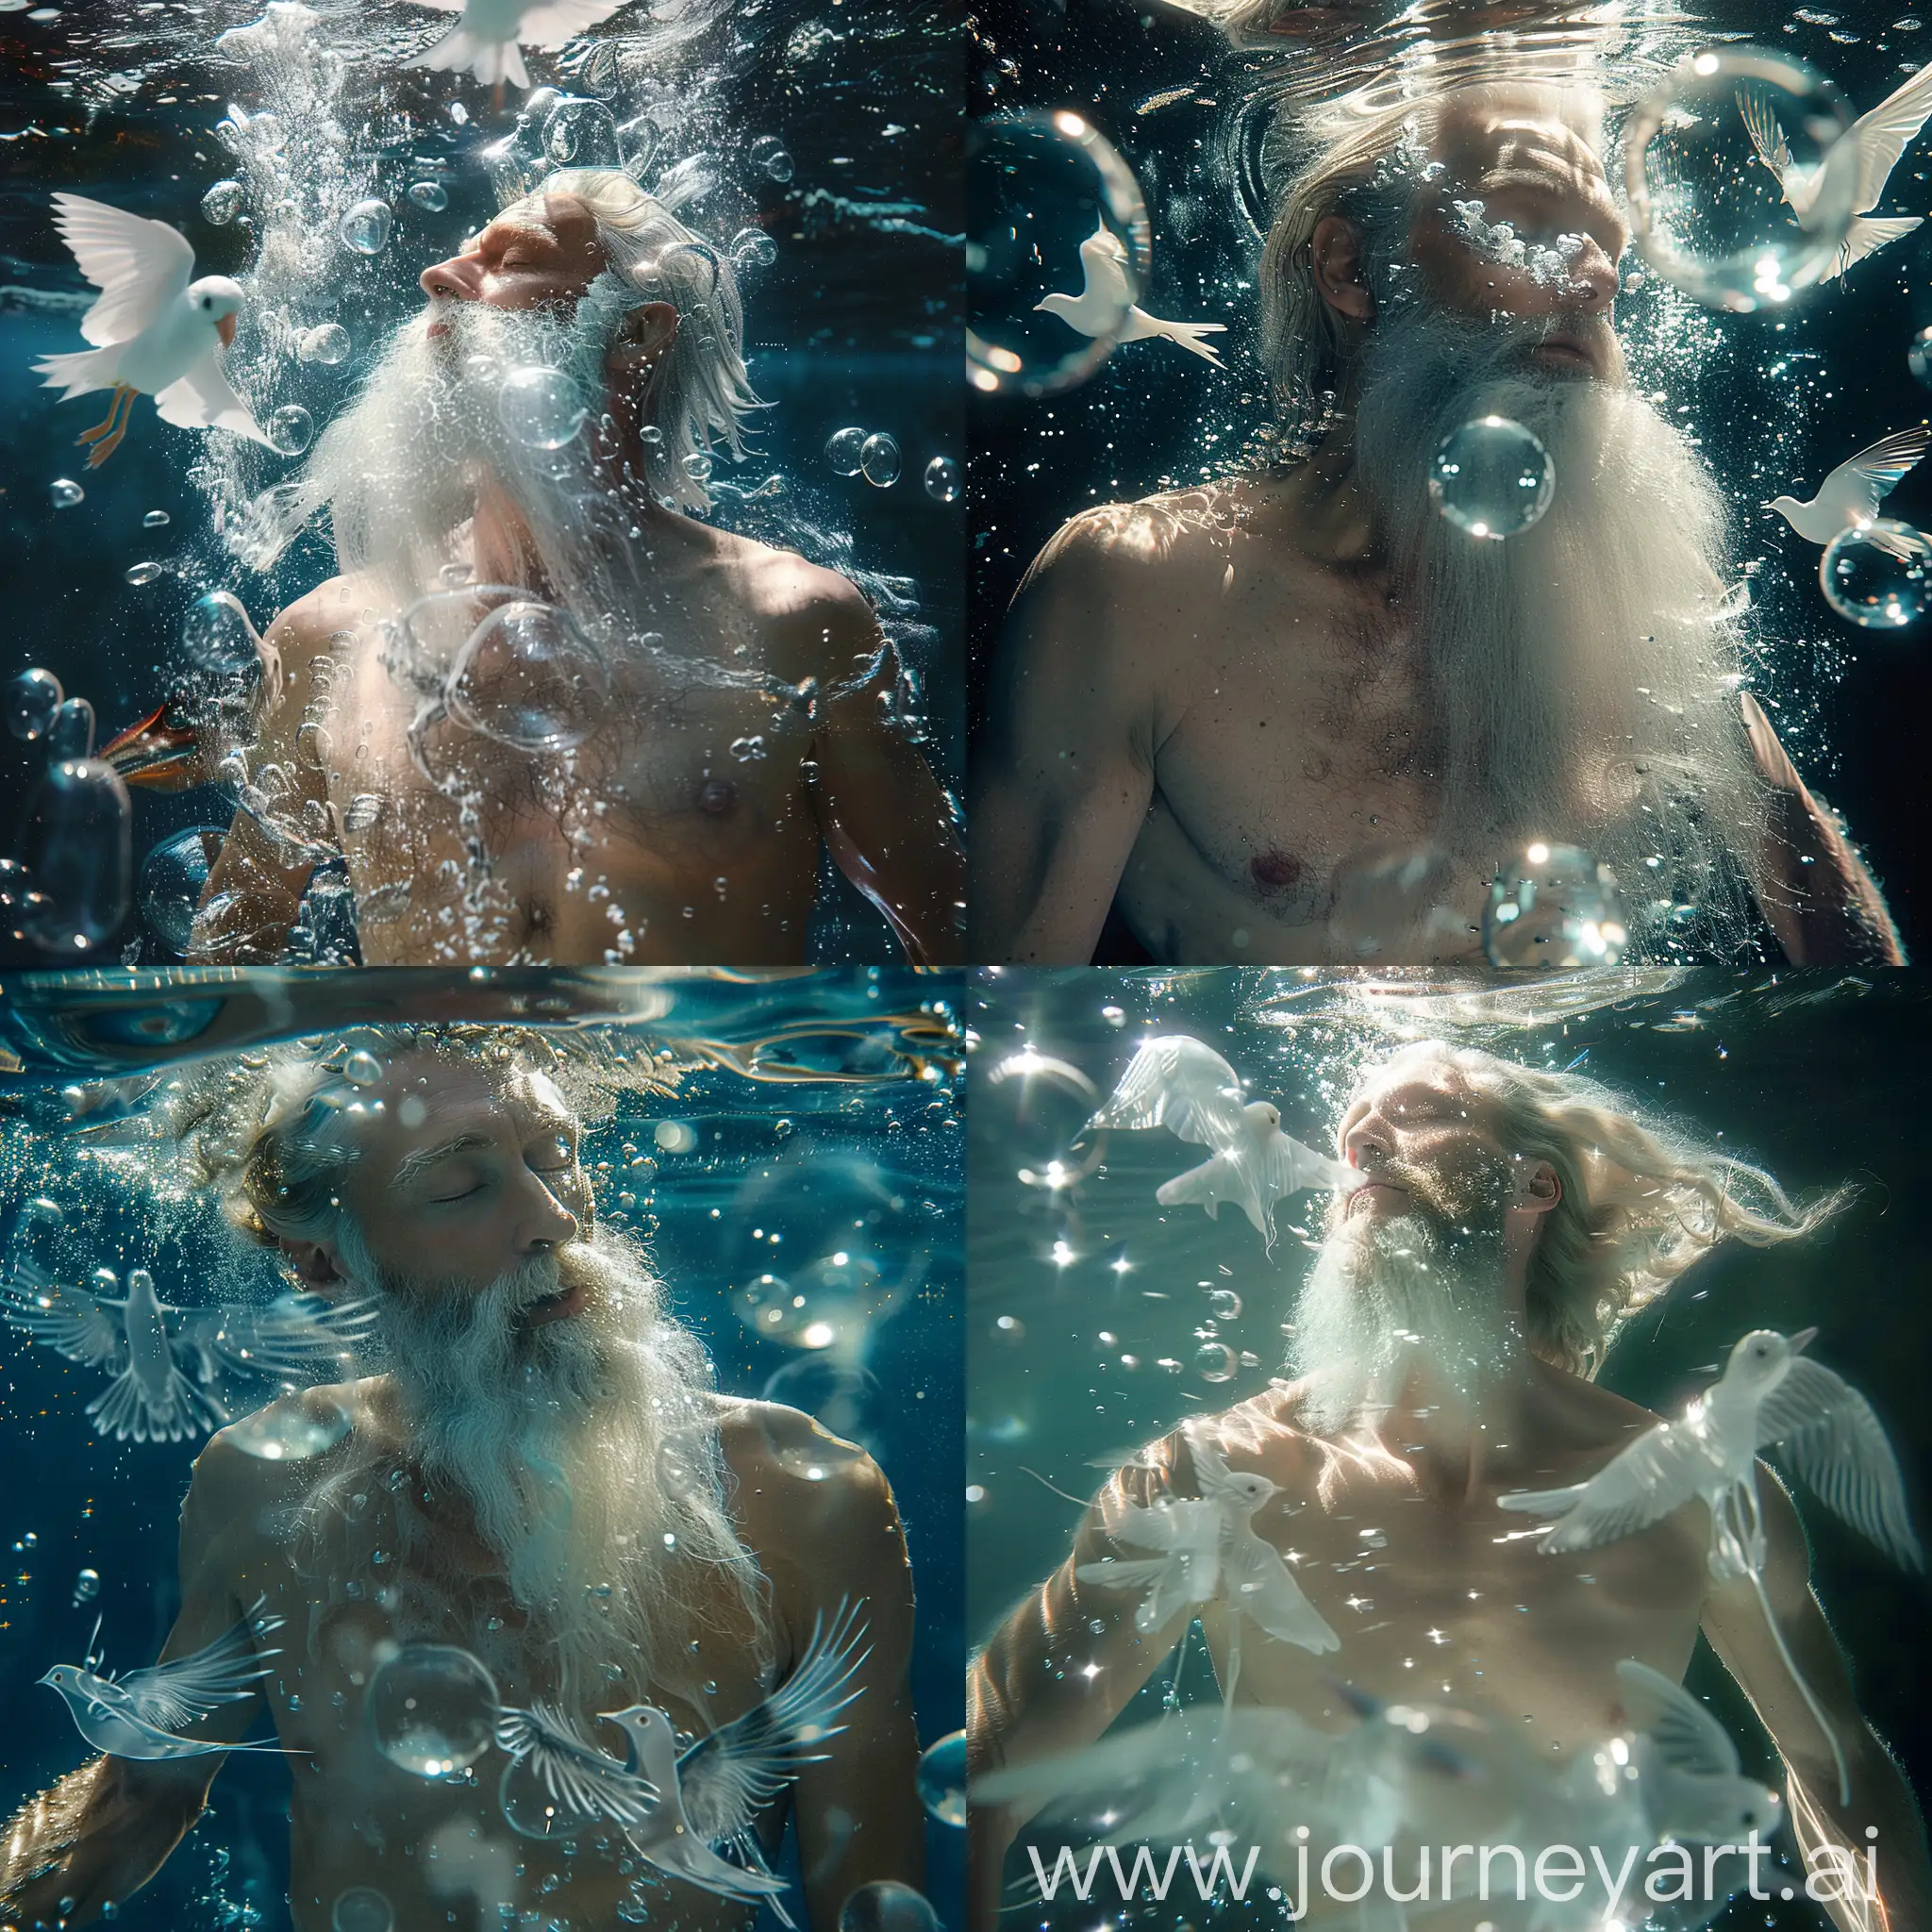 Serene-Aquatic-Moment-Tranquil-WhiteBearded-Man-Underwater-with-Ethereal-Bubbles-and-Transparent-Birds